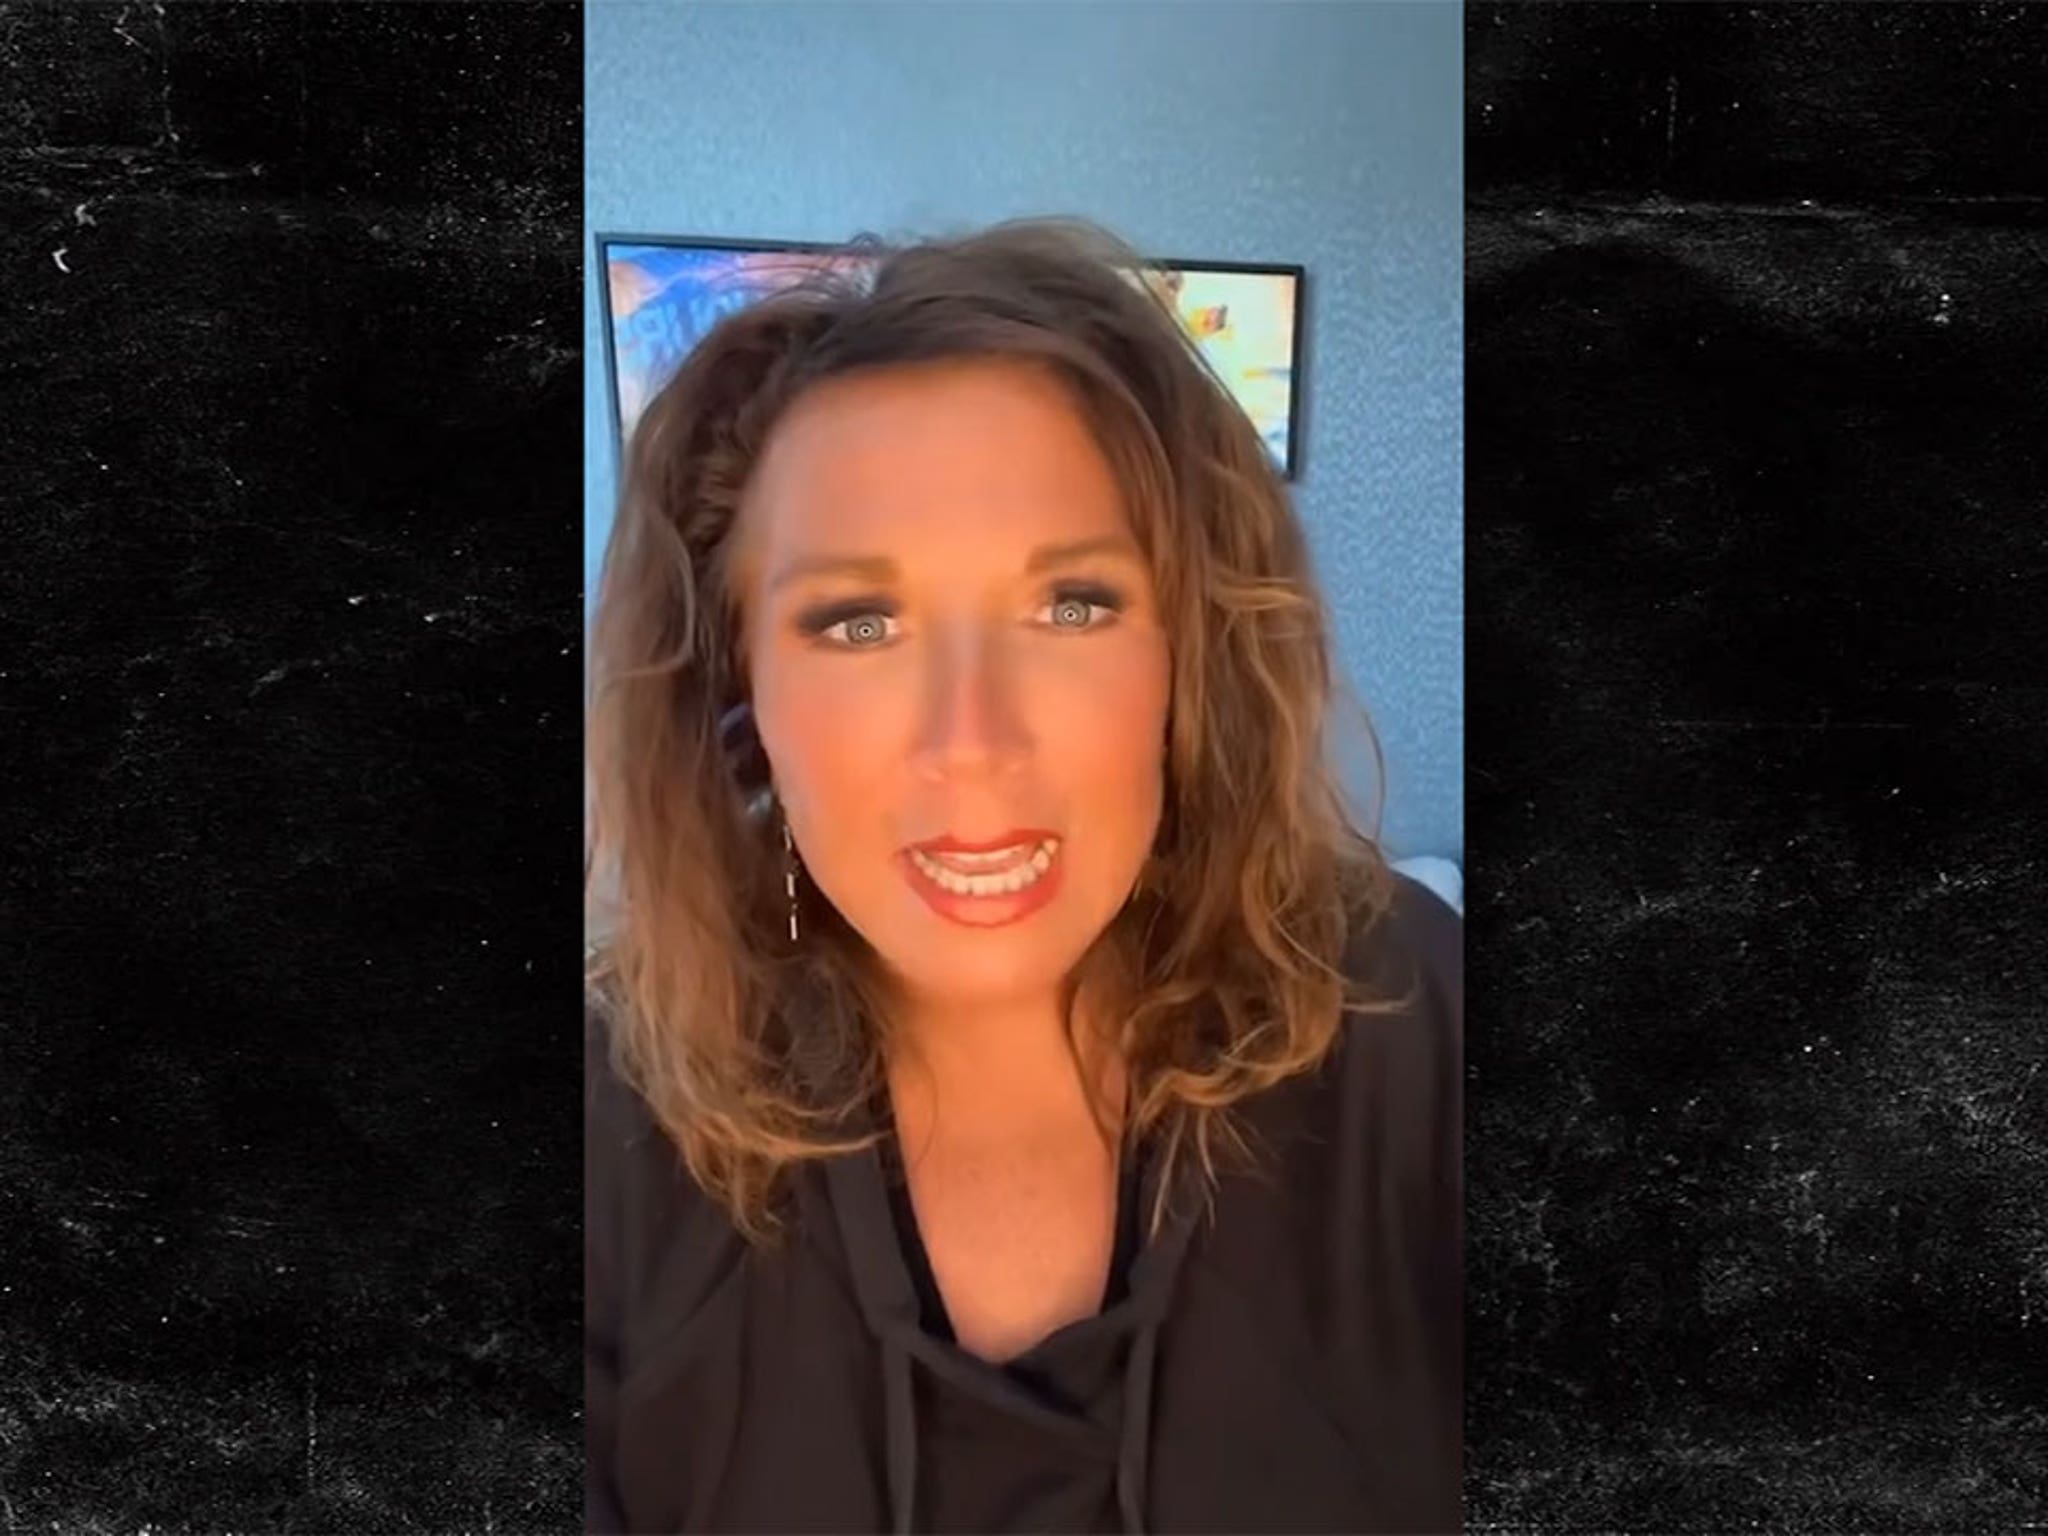 Abby Lee Miller admits attraction to high school football players